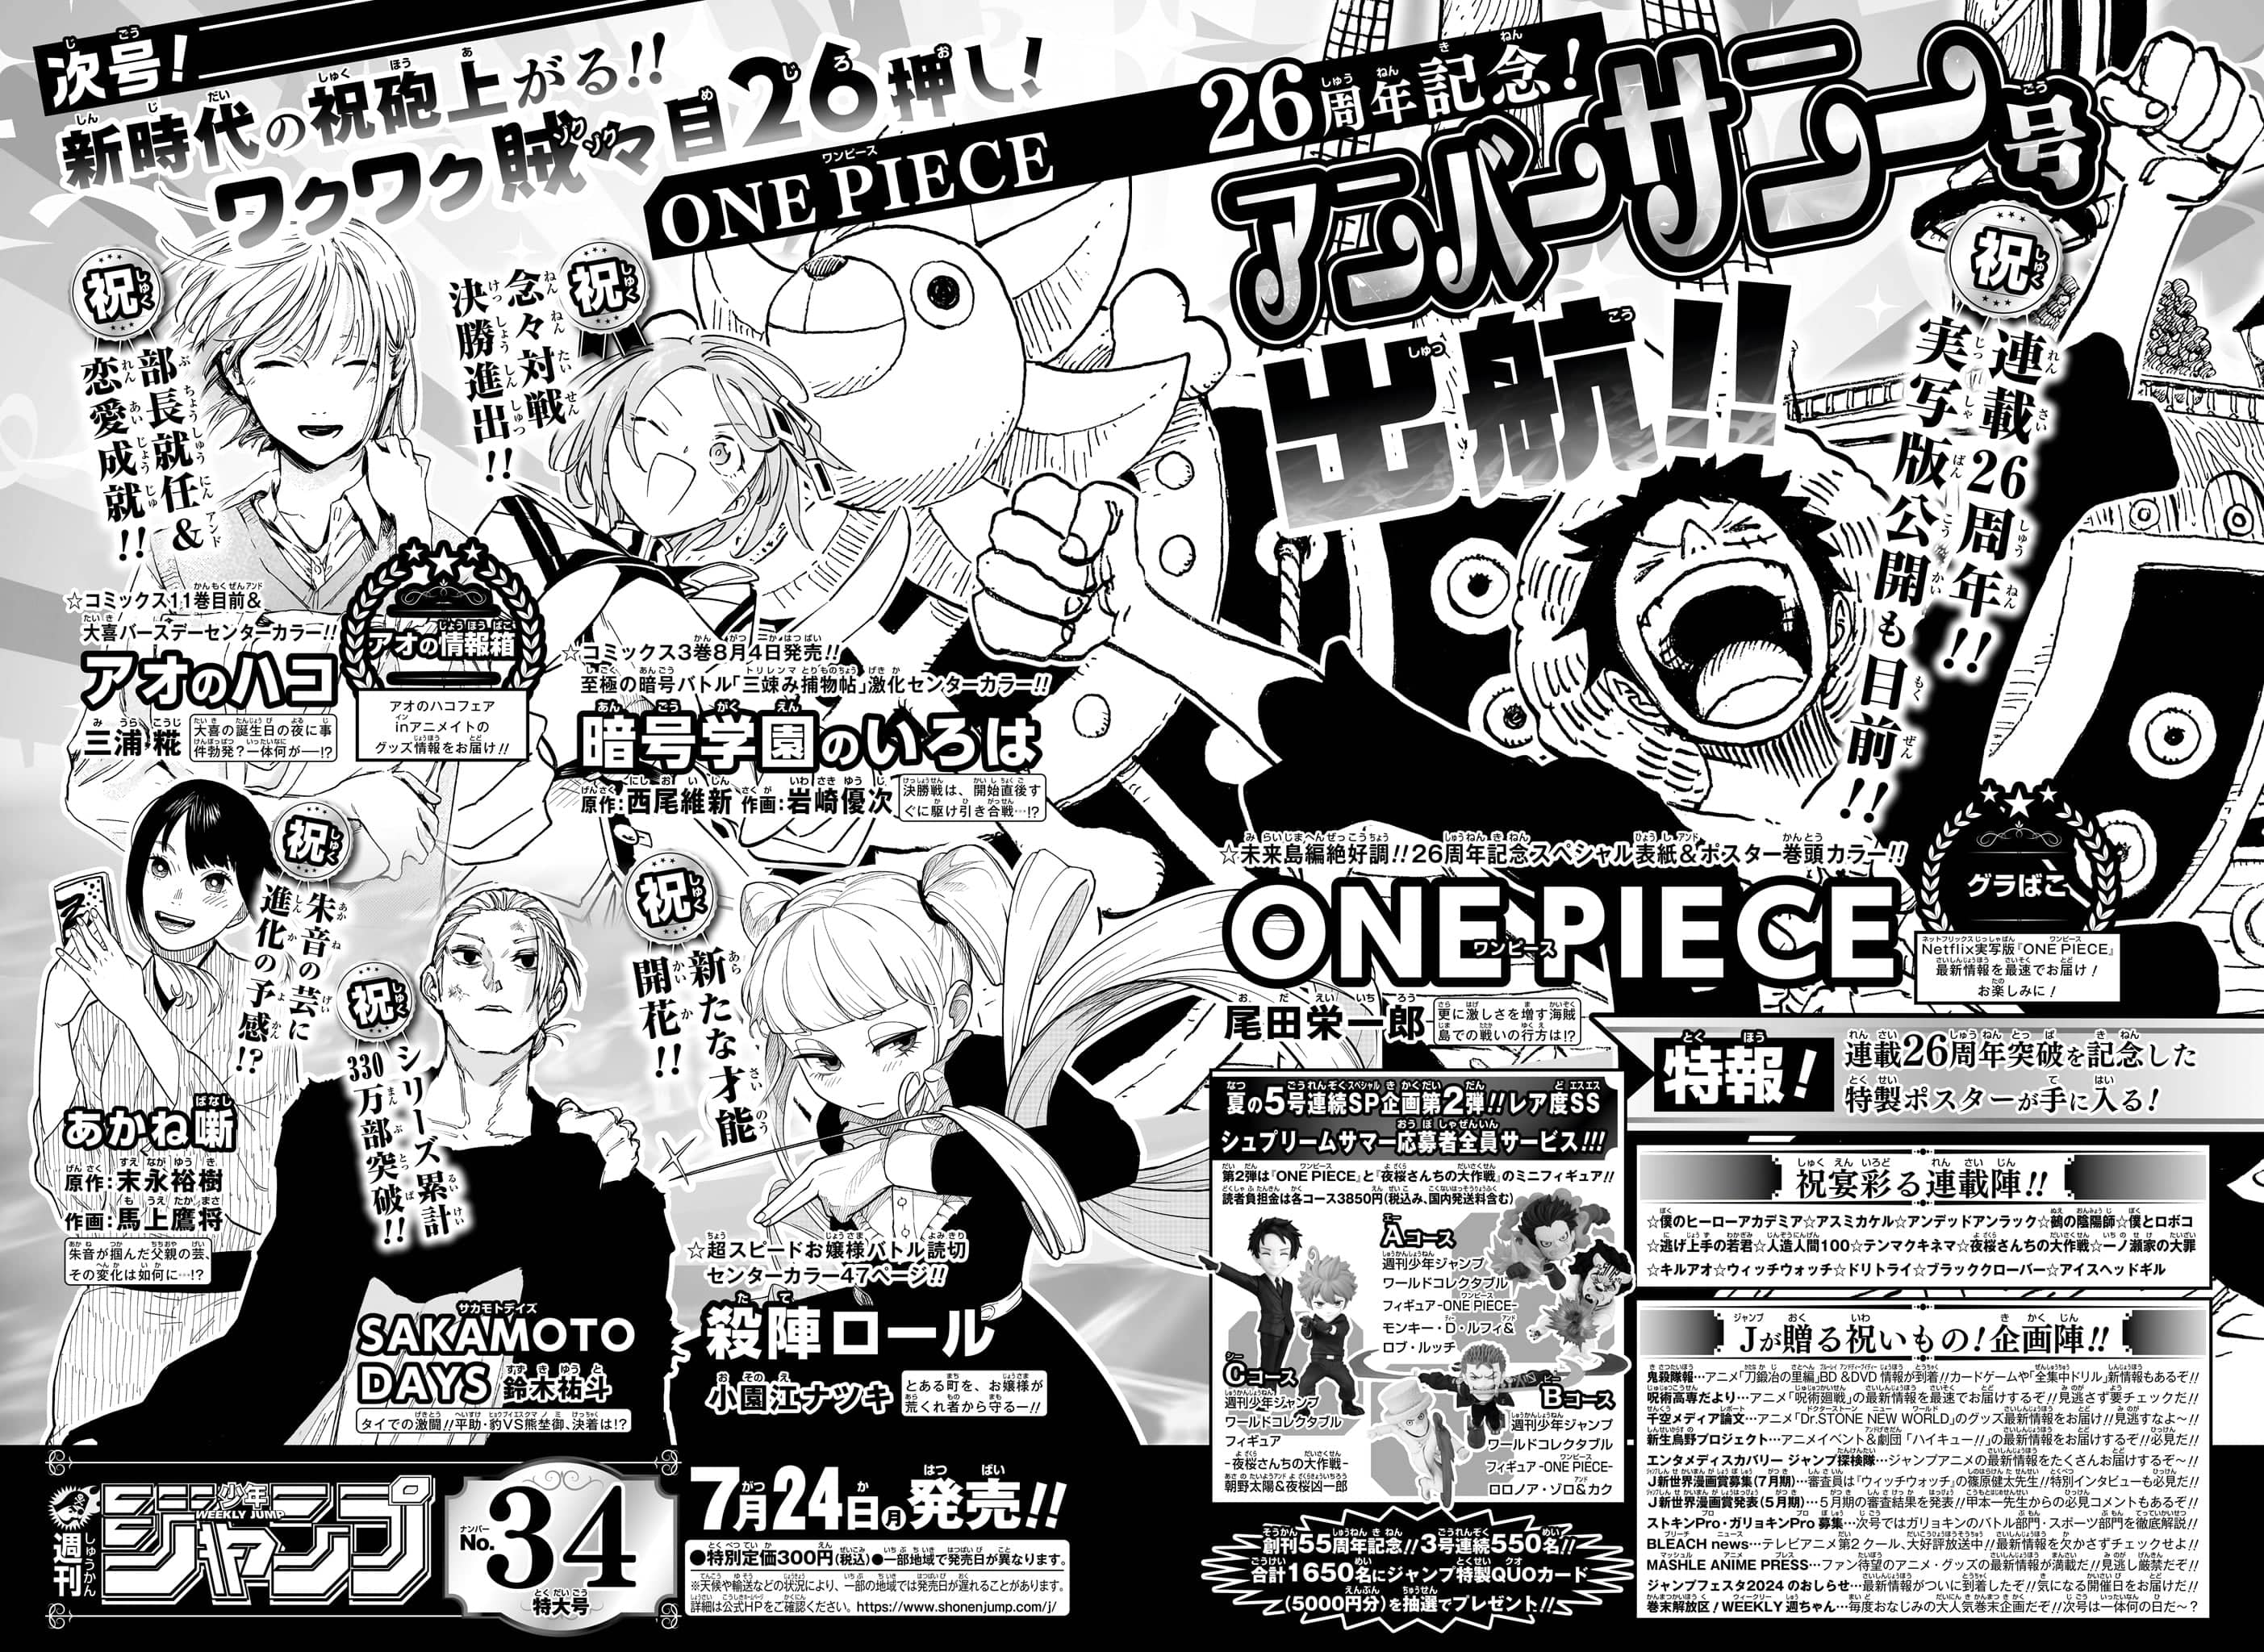 ANIME Media - Boruto: Naruto the Movie Villains Previewed Next Monday's  issue 33 of Shonen Jump is set to offer a look at the antagonists of Boruto:  Naruto the Movie . These